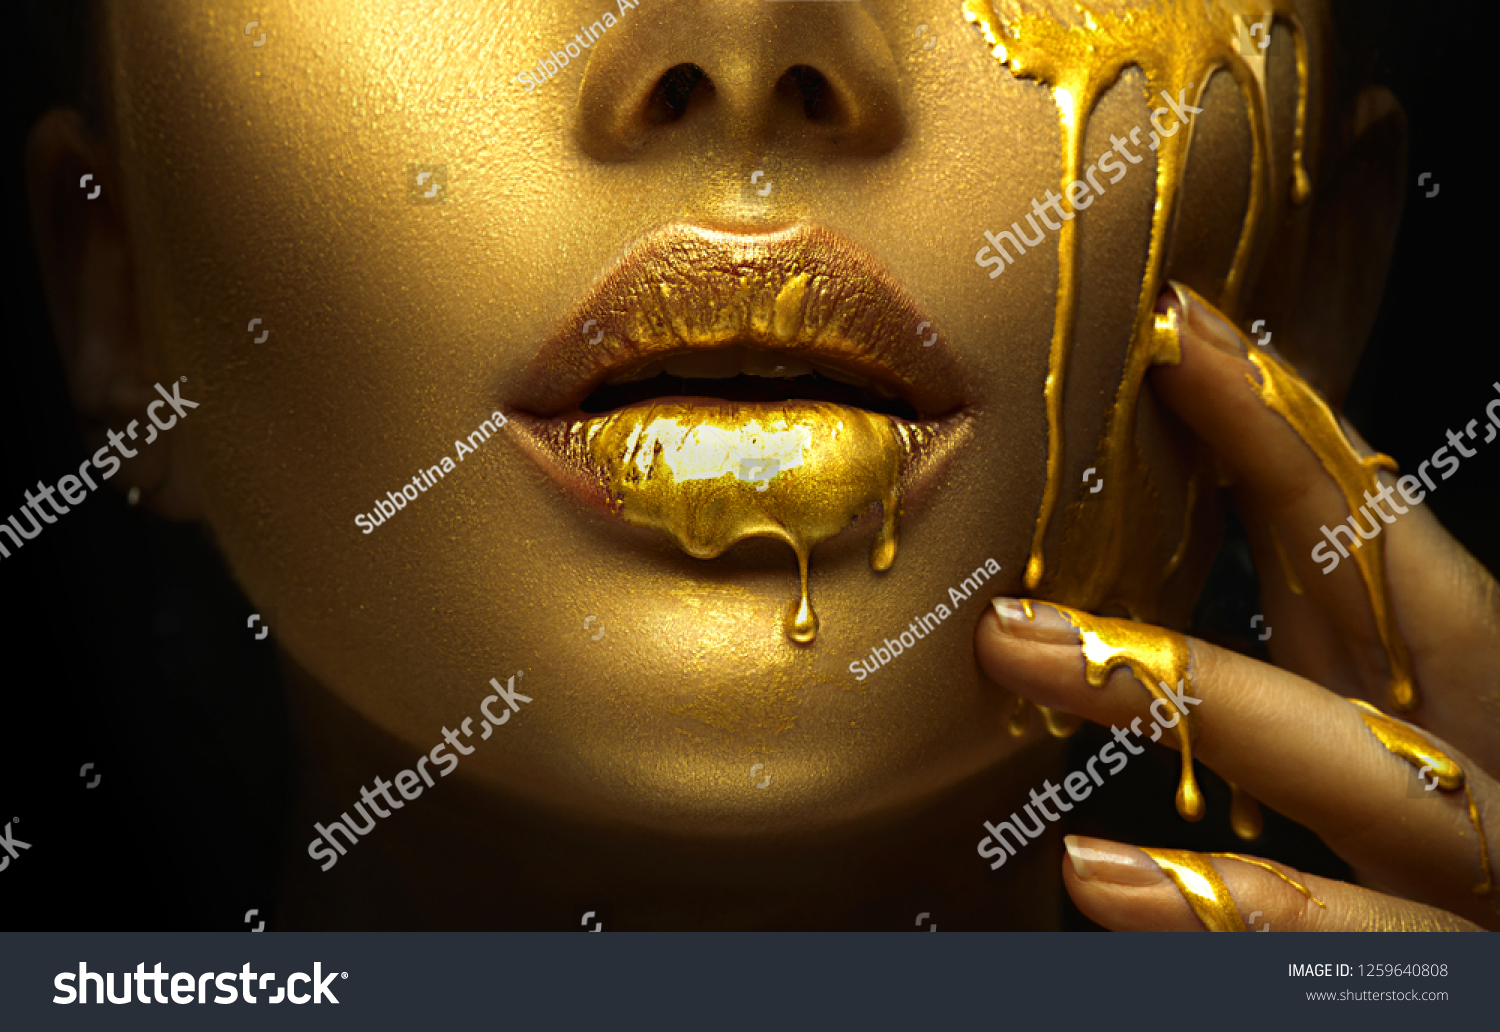 Gold Paint smudges drips from the face lips and hand, lipgloss dripping from sexy lips, golden liquid drops on beautiful model girl's mouth, gold metallic skin make-up. Beauty woman makeup close up. #1259640808